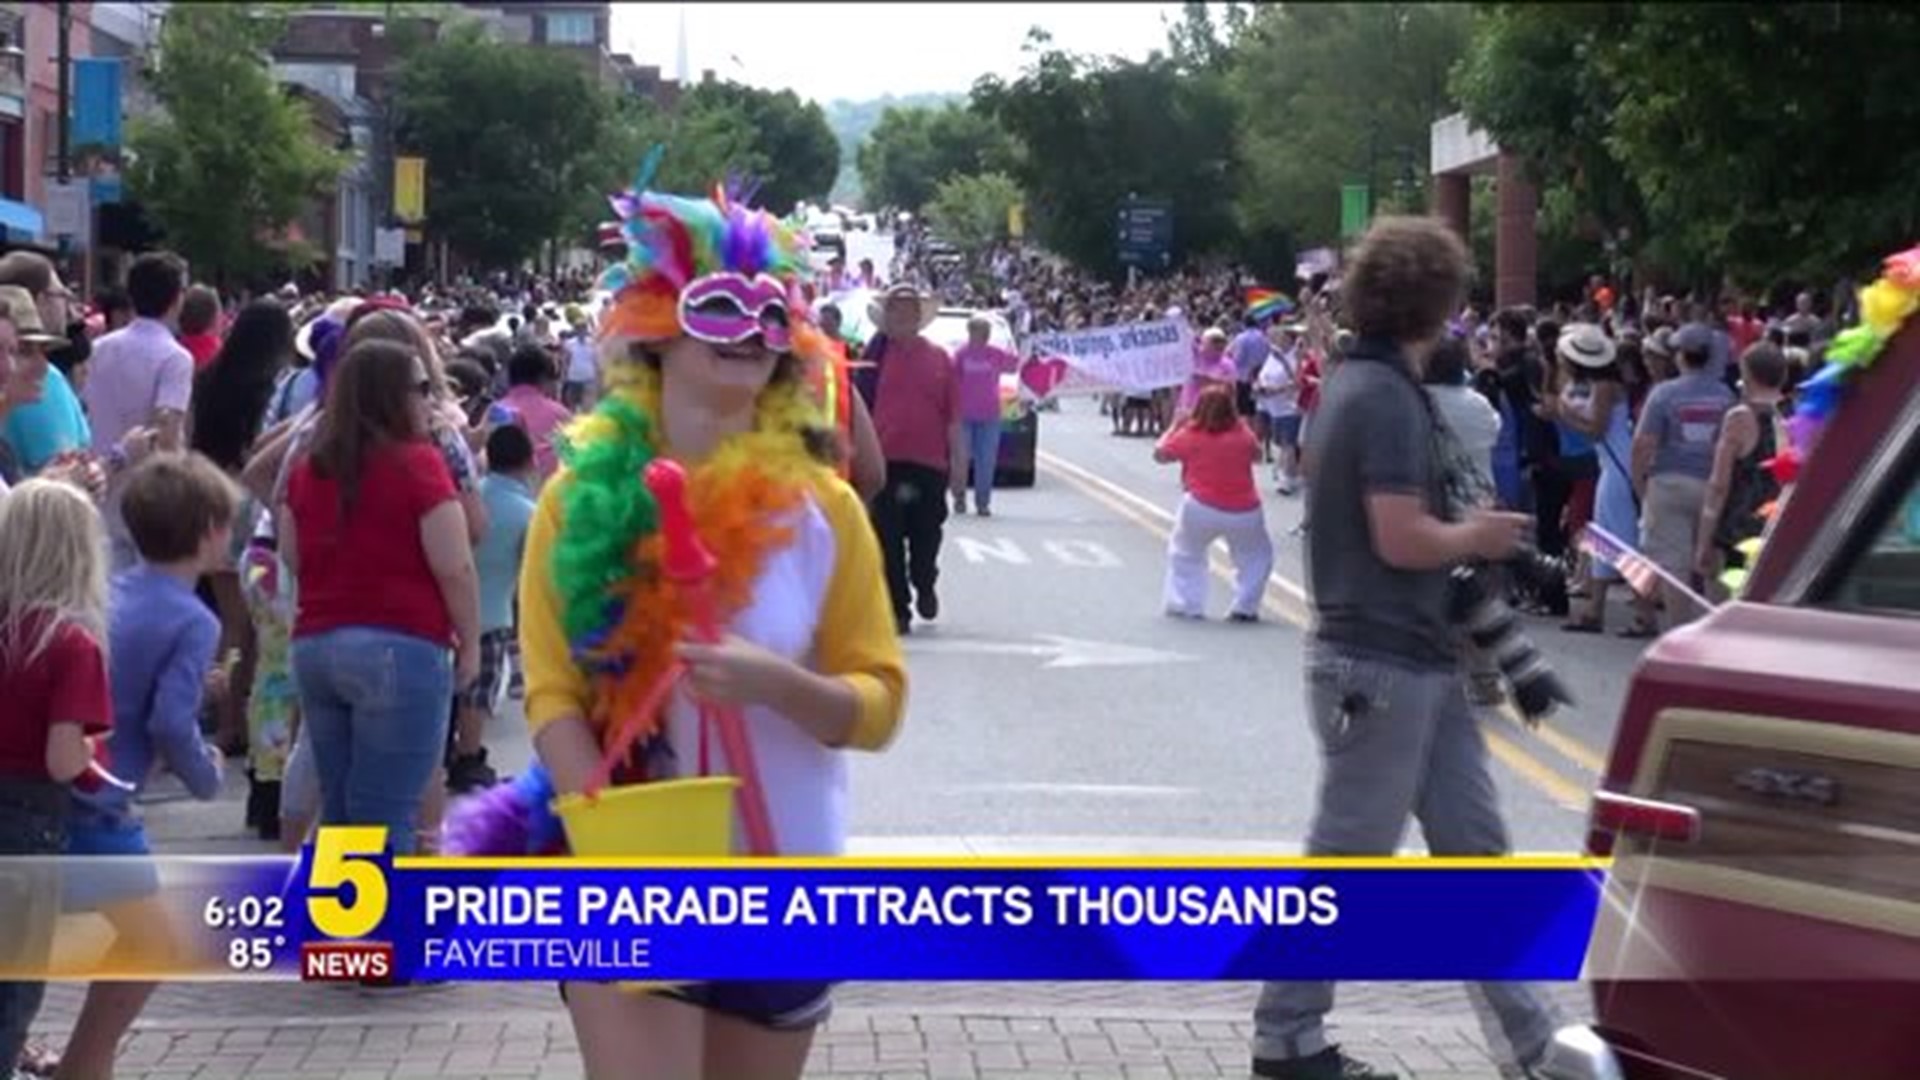 Fayetteville Pride Parade Attracts Thousands